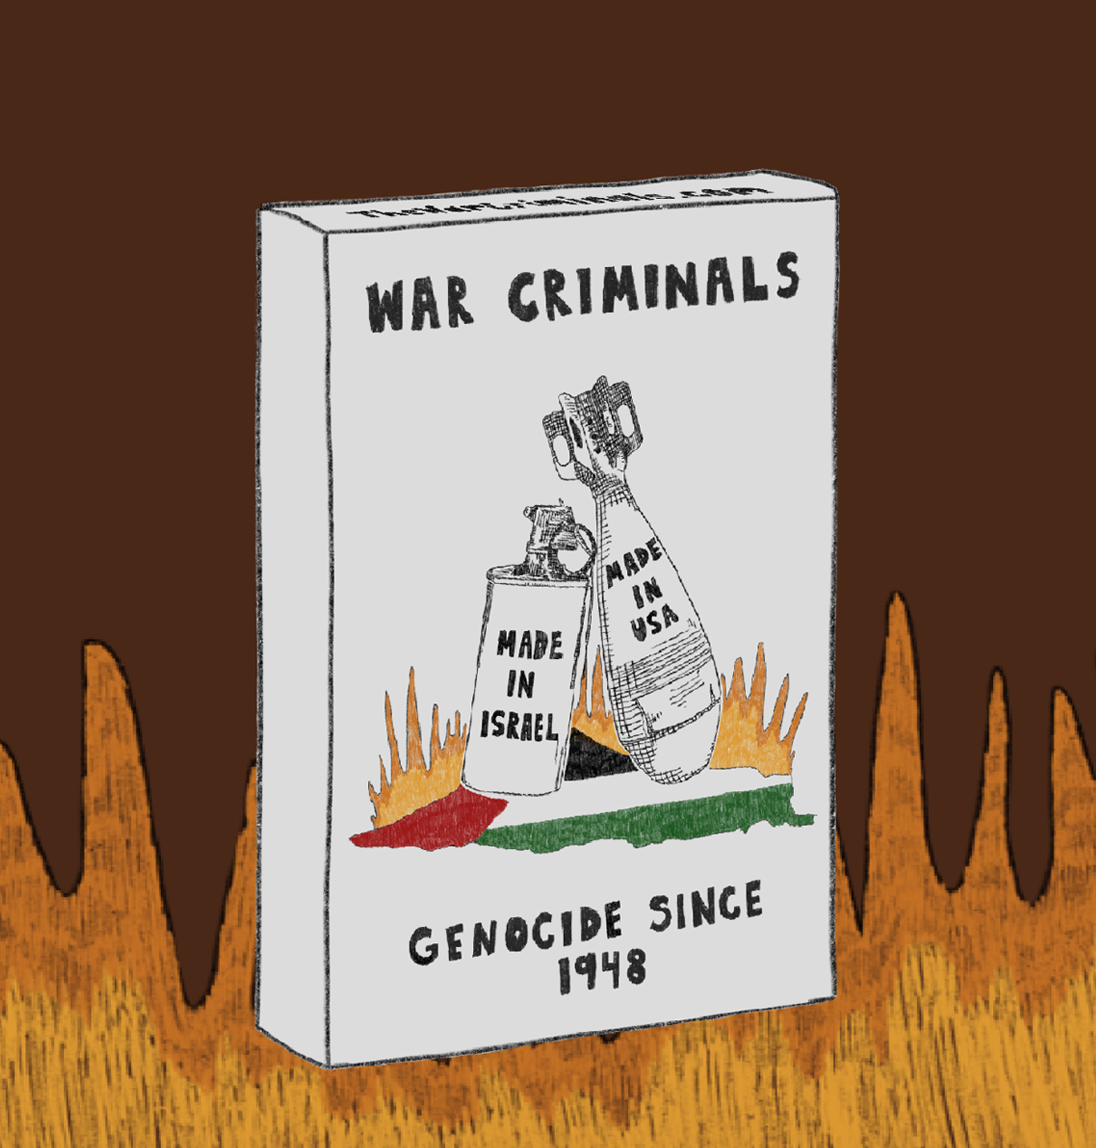 War Criminals Playing Cards box illustrated. Header says "War Criminals" and an image of a bomb labeled "Made in USA", a tear gas canister labeled "Made in Israel" hitting a map of Palestine colored in red, green, black and white and a border of flames. B